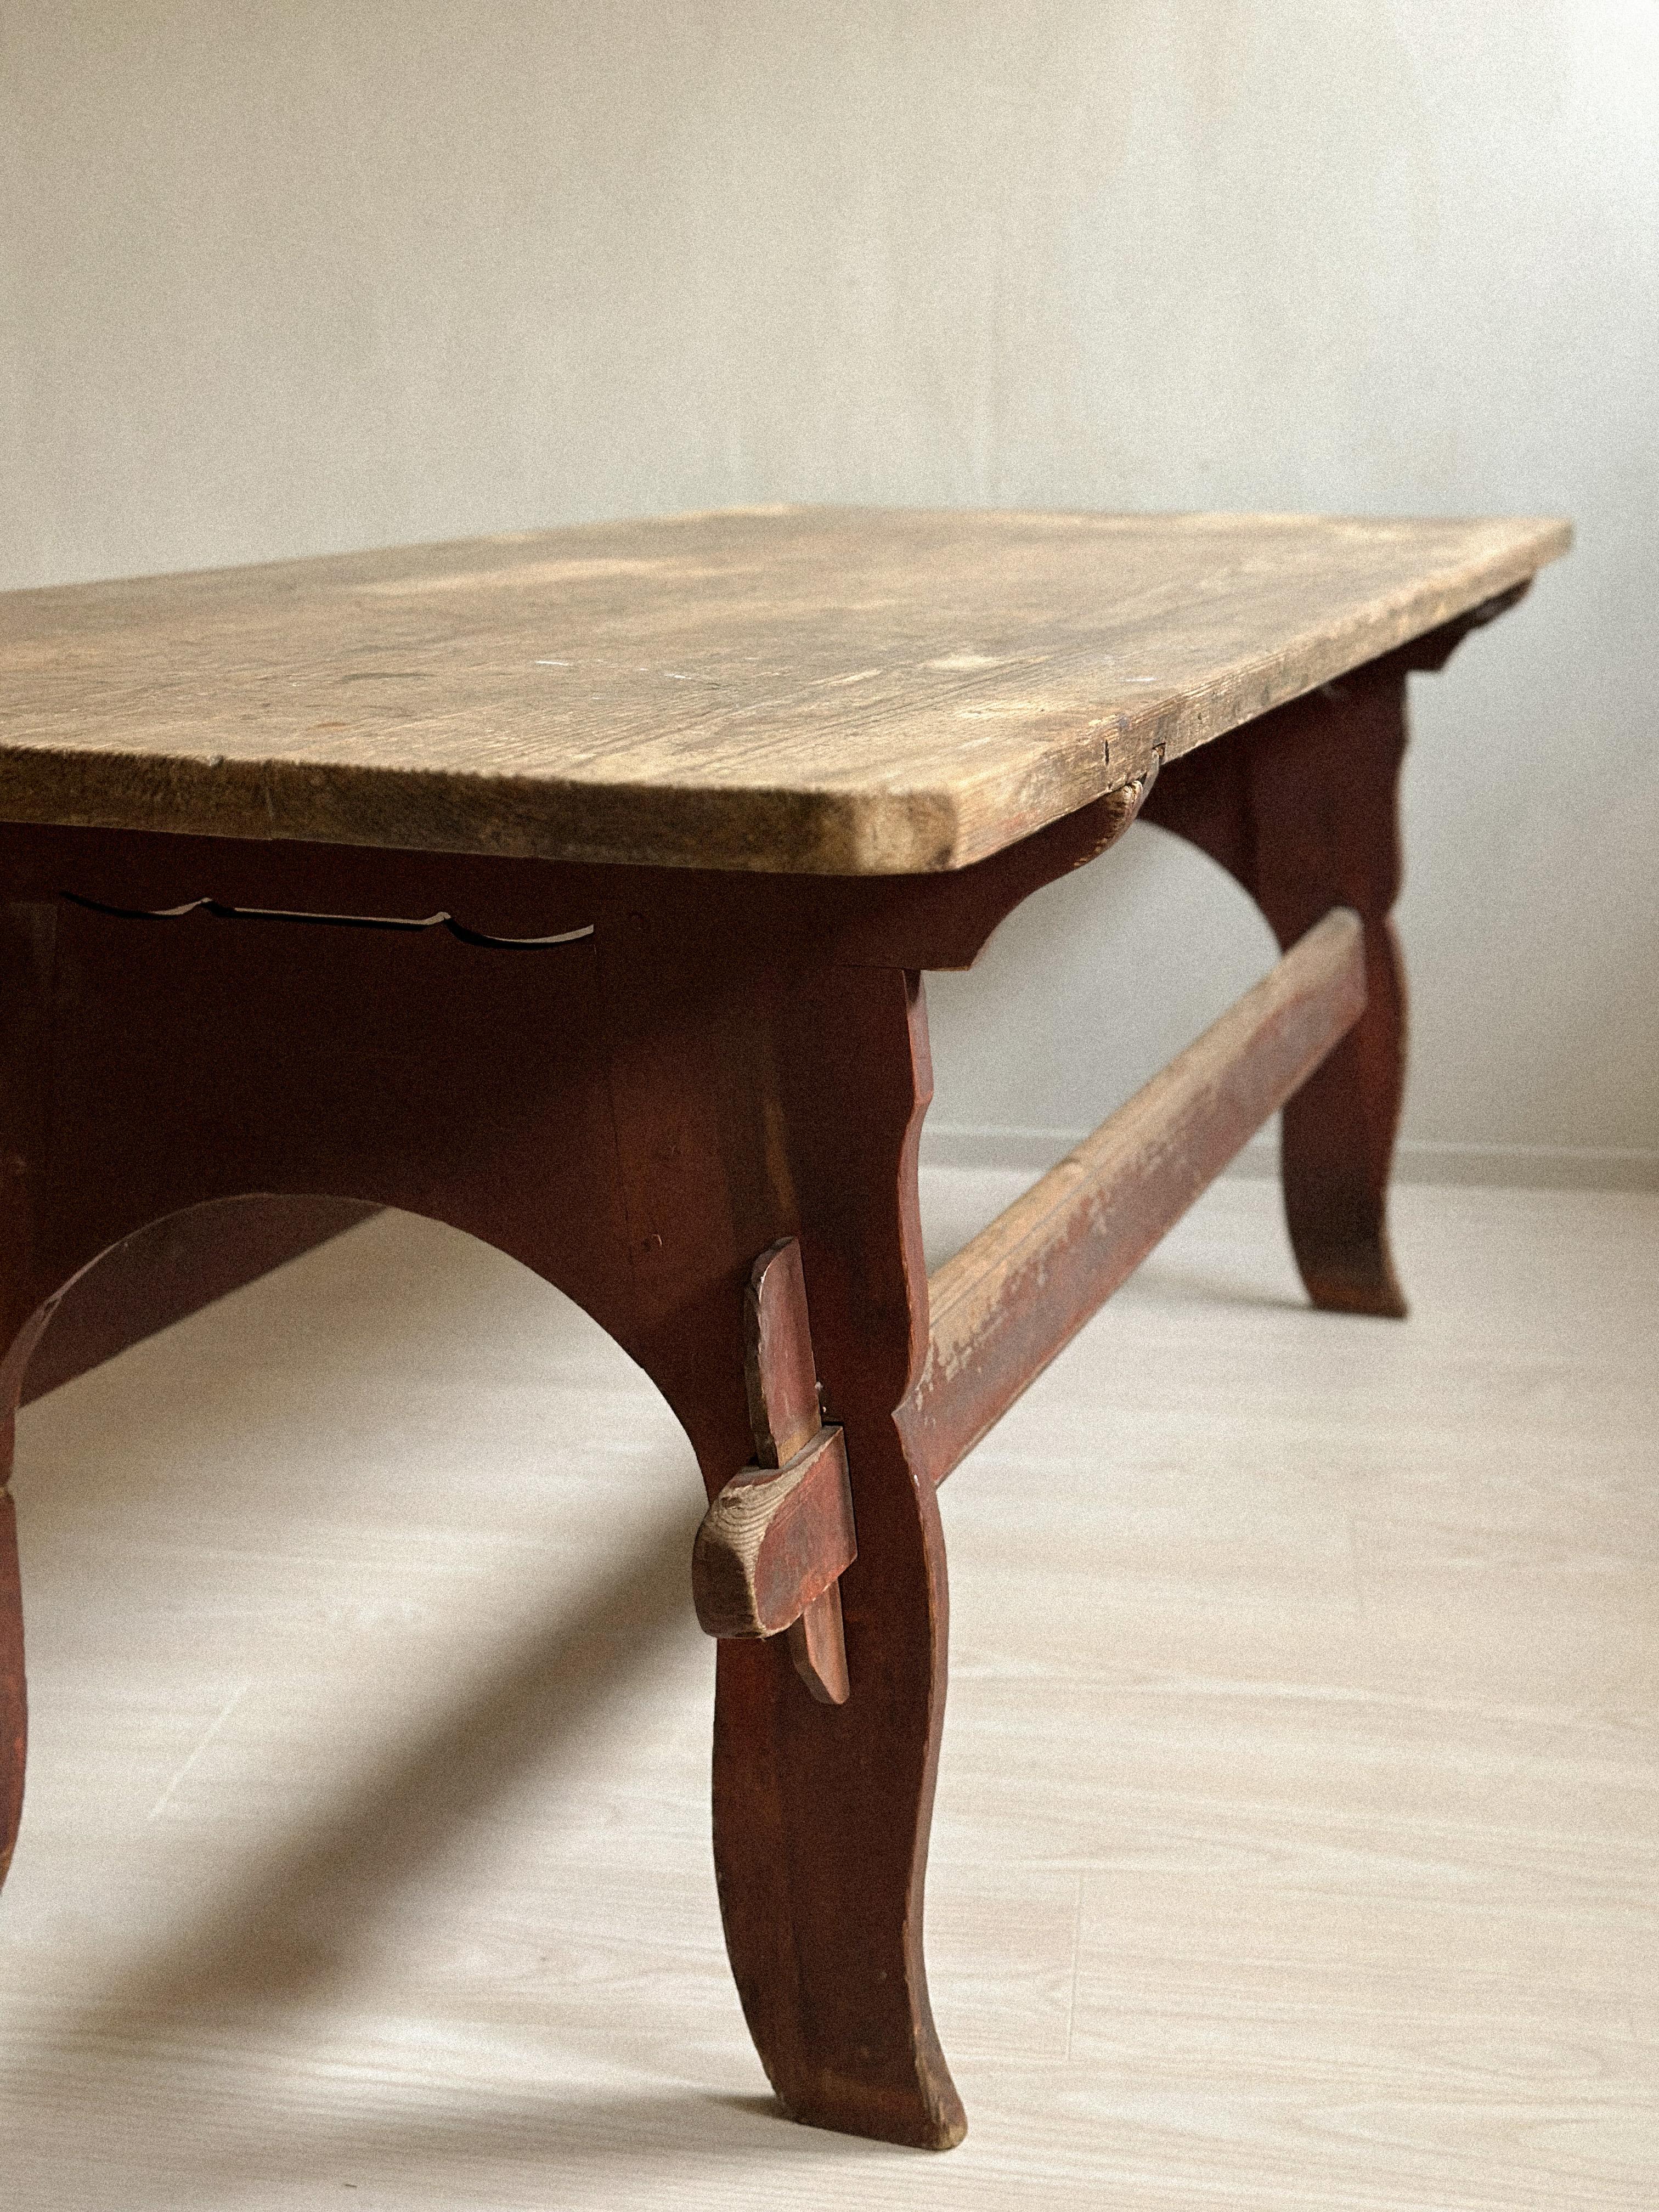 Wood Antique Wabi Sabi Dining Table or Desk, Anonymous, Scandinavia c. 1800s  For Sale